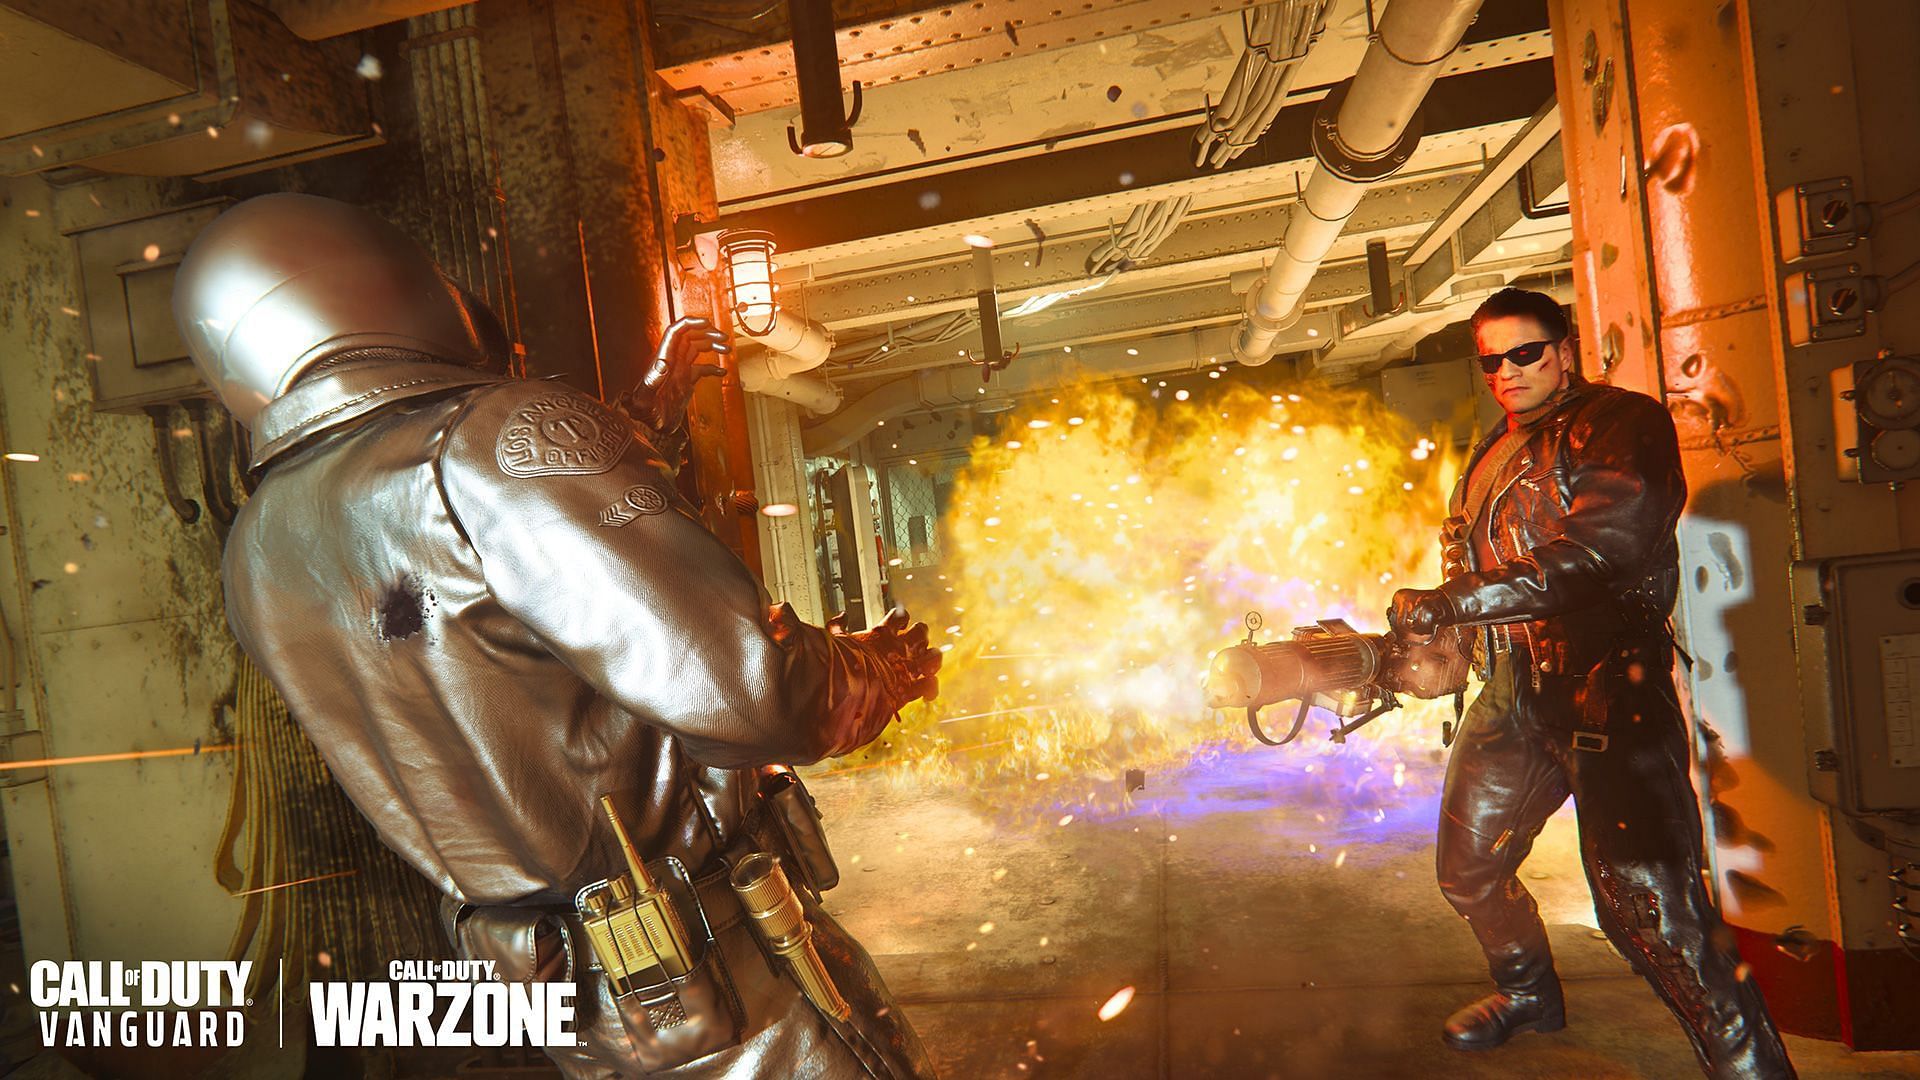 Terminator crossover is coming to Warzone Season 4 Reloaded (Image via Activision)